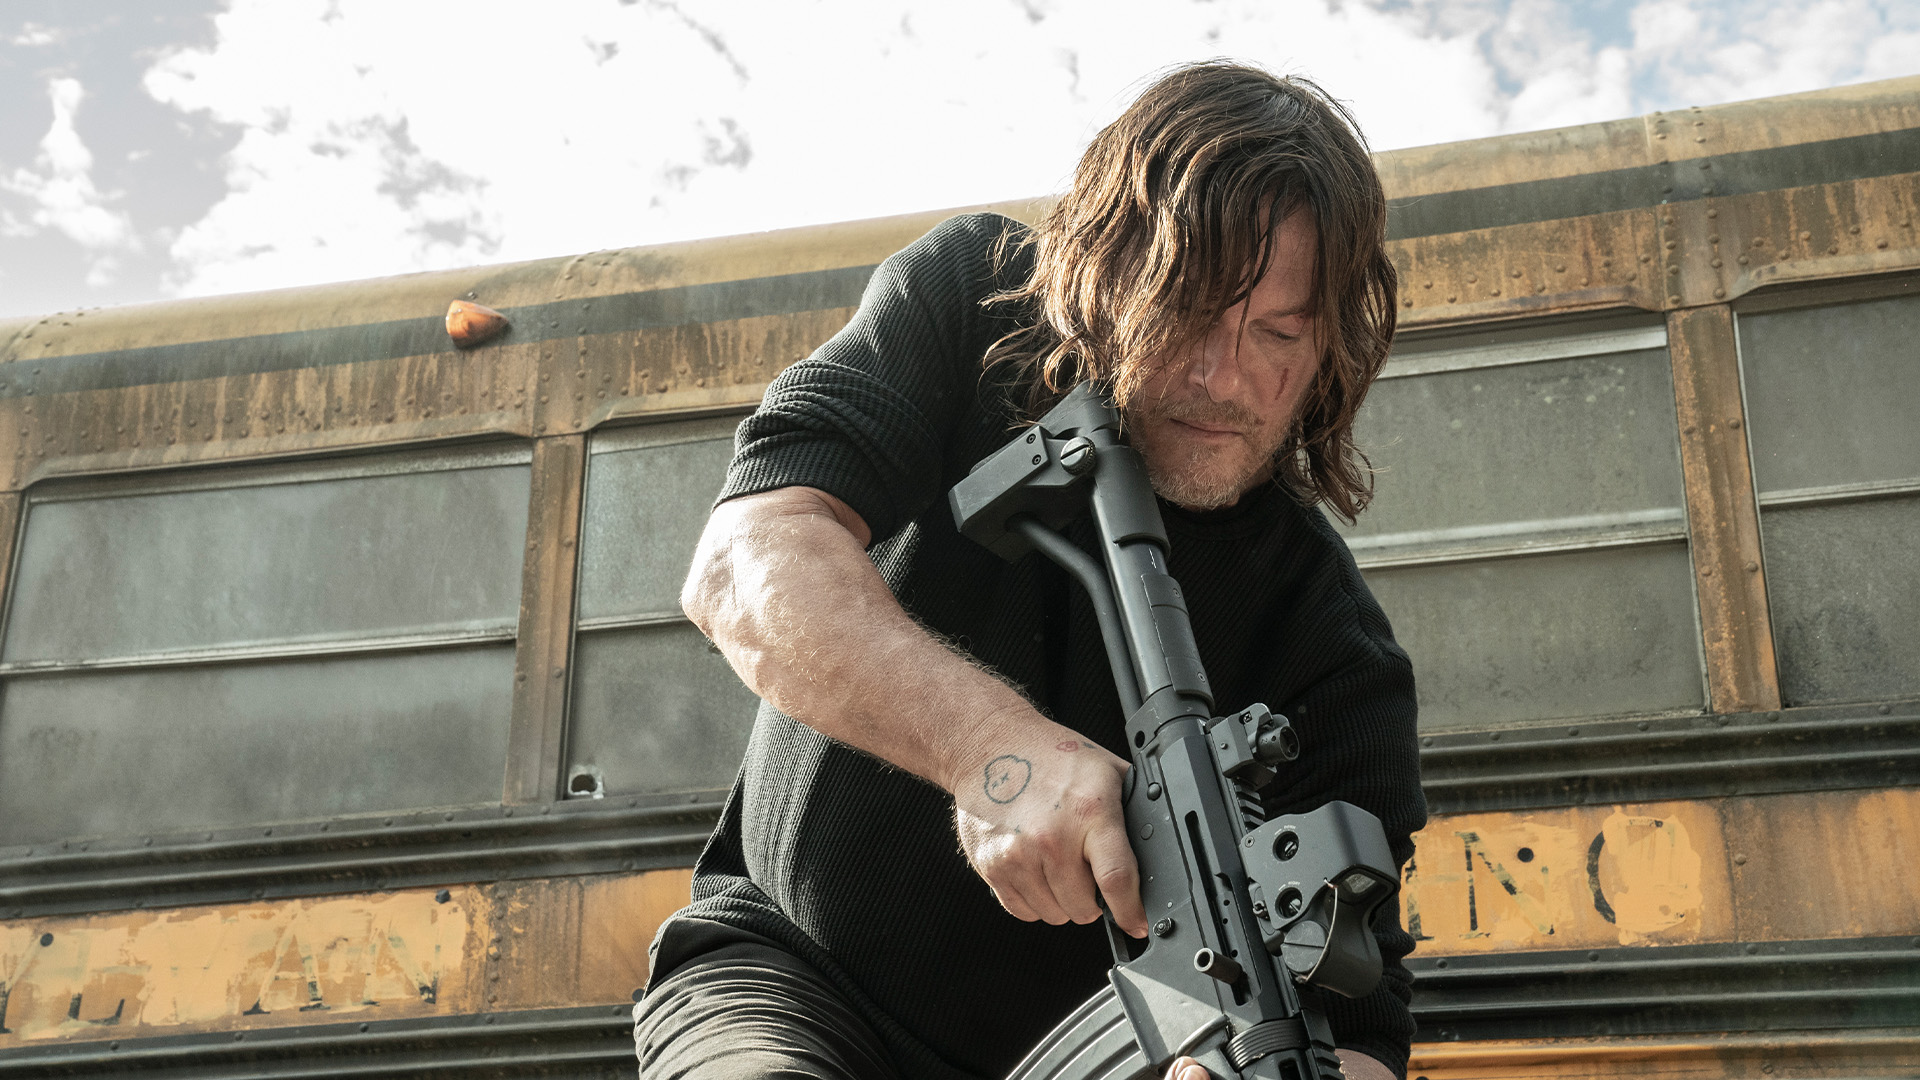 The Walking Dead: Best of Daryl Season 1 Episode 6 - Acts of God: Best of Daryl Edition